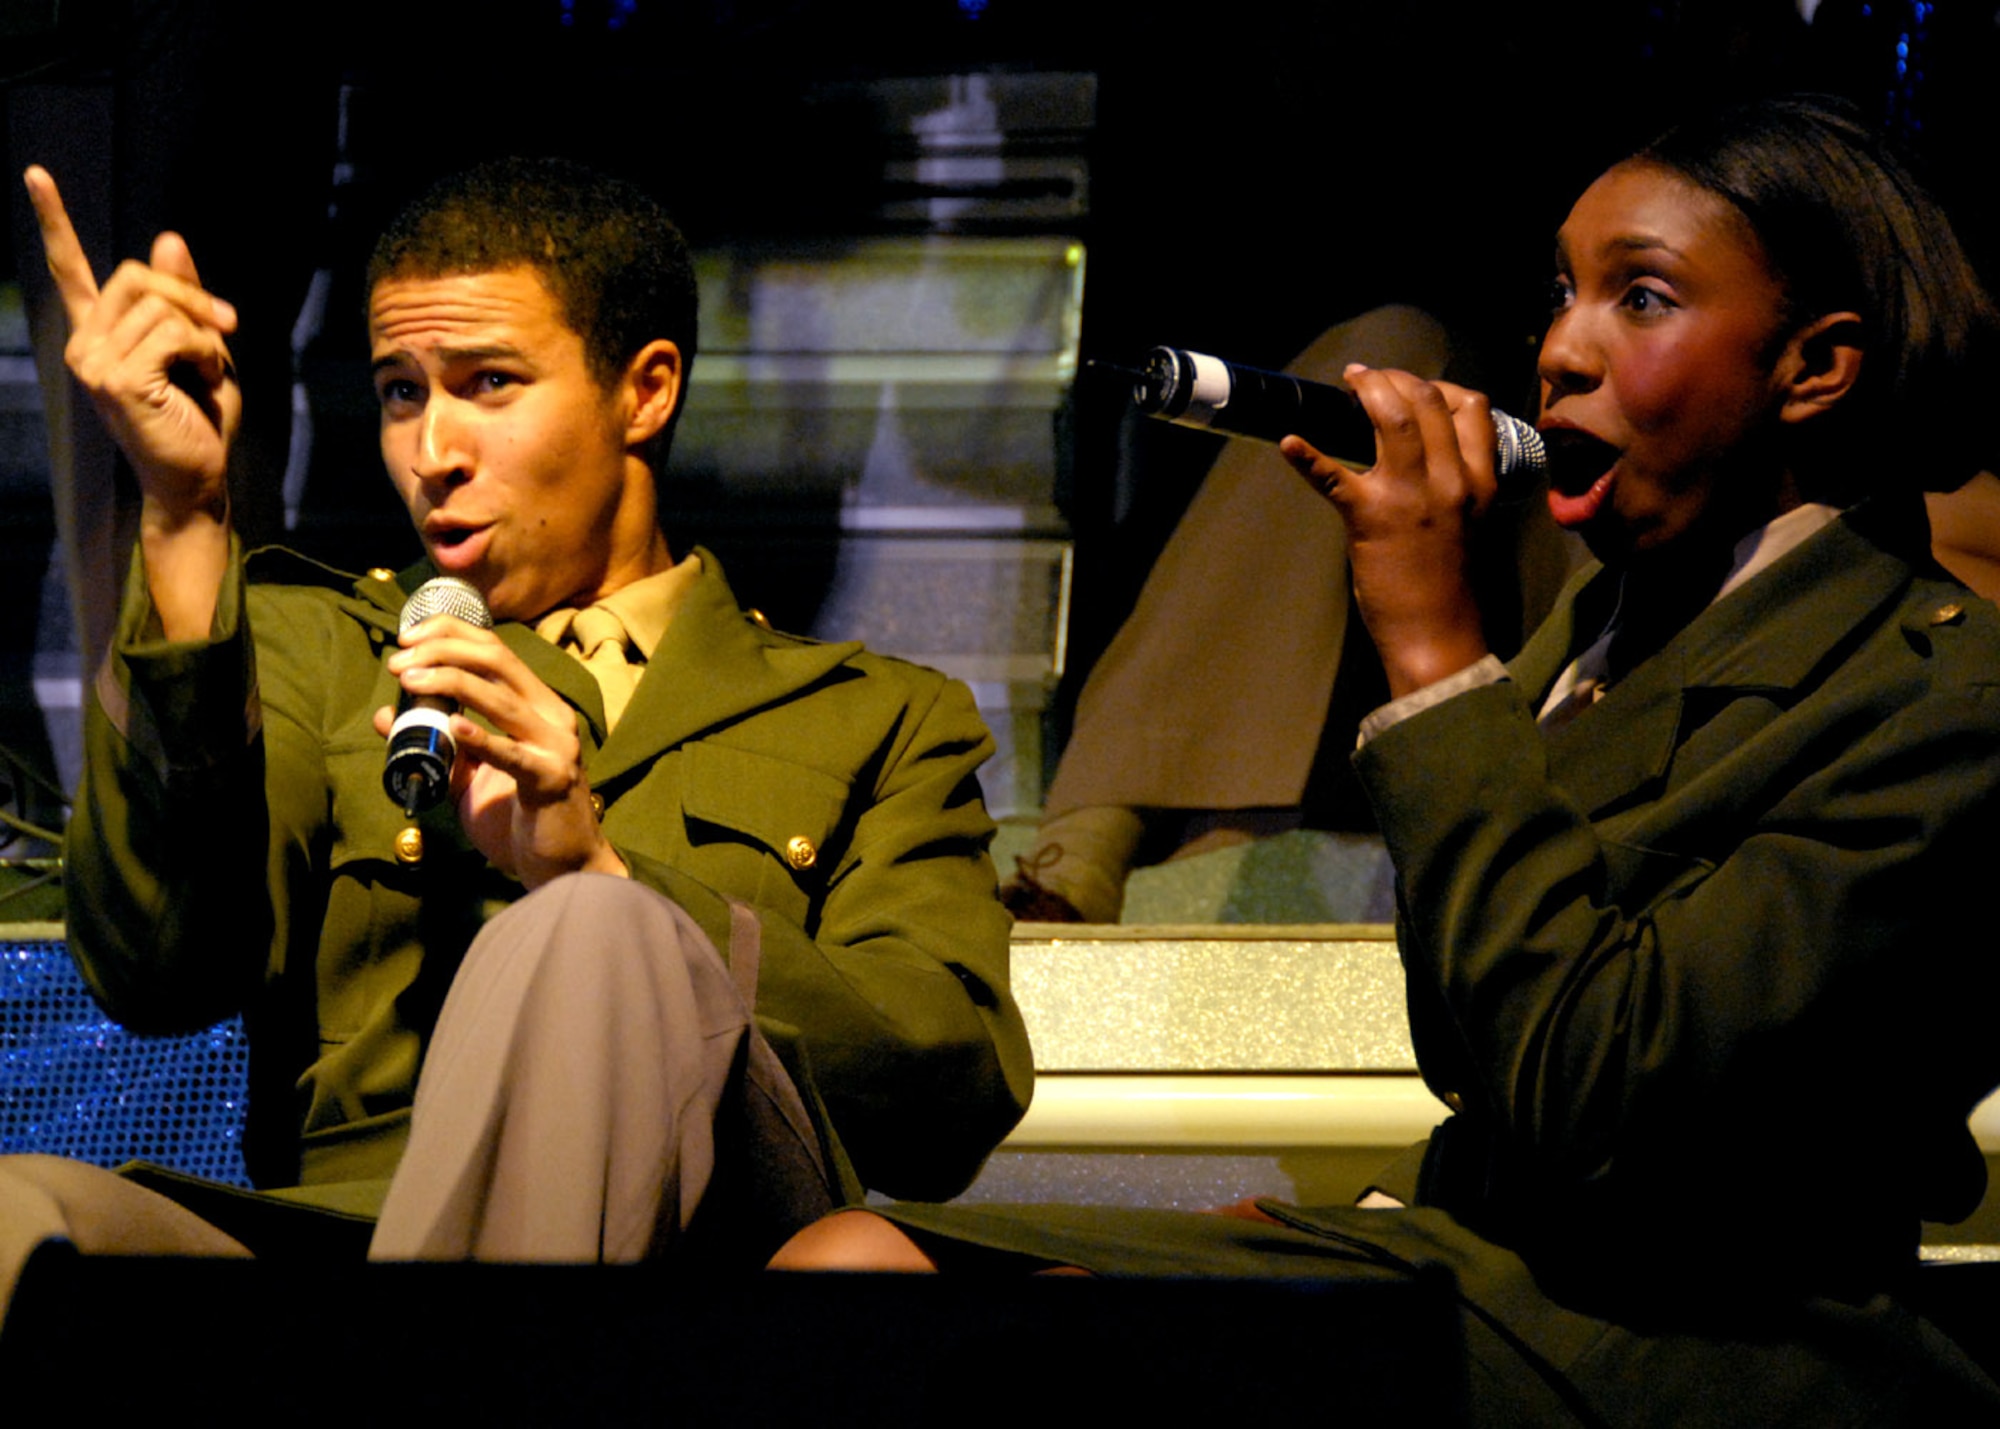 Airman 1st Class Jesse Cox (left) and Senior Airman Chonte Walker perform during their annual world tour celebrating "The Fly-By", a musical tribute to 60 years of proud Air Force history Dec. 19 at Osan Air Base, South Korea. Airmen Cox and Walker are Tops In Blue vocalists. During each annual tour, Tops In Blue entertains more than 250,000 military members and their families, presenting an average of 120 performances at 100 locations worldwide. (U.S. Air Force photo/Senior Master Sgt. Marvin Krause) 
